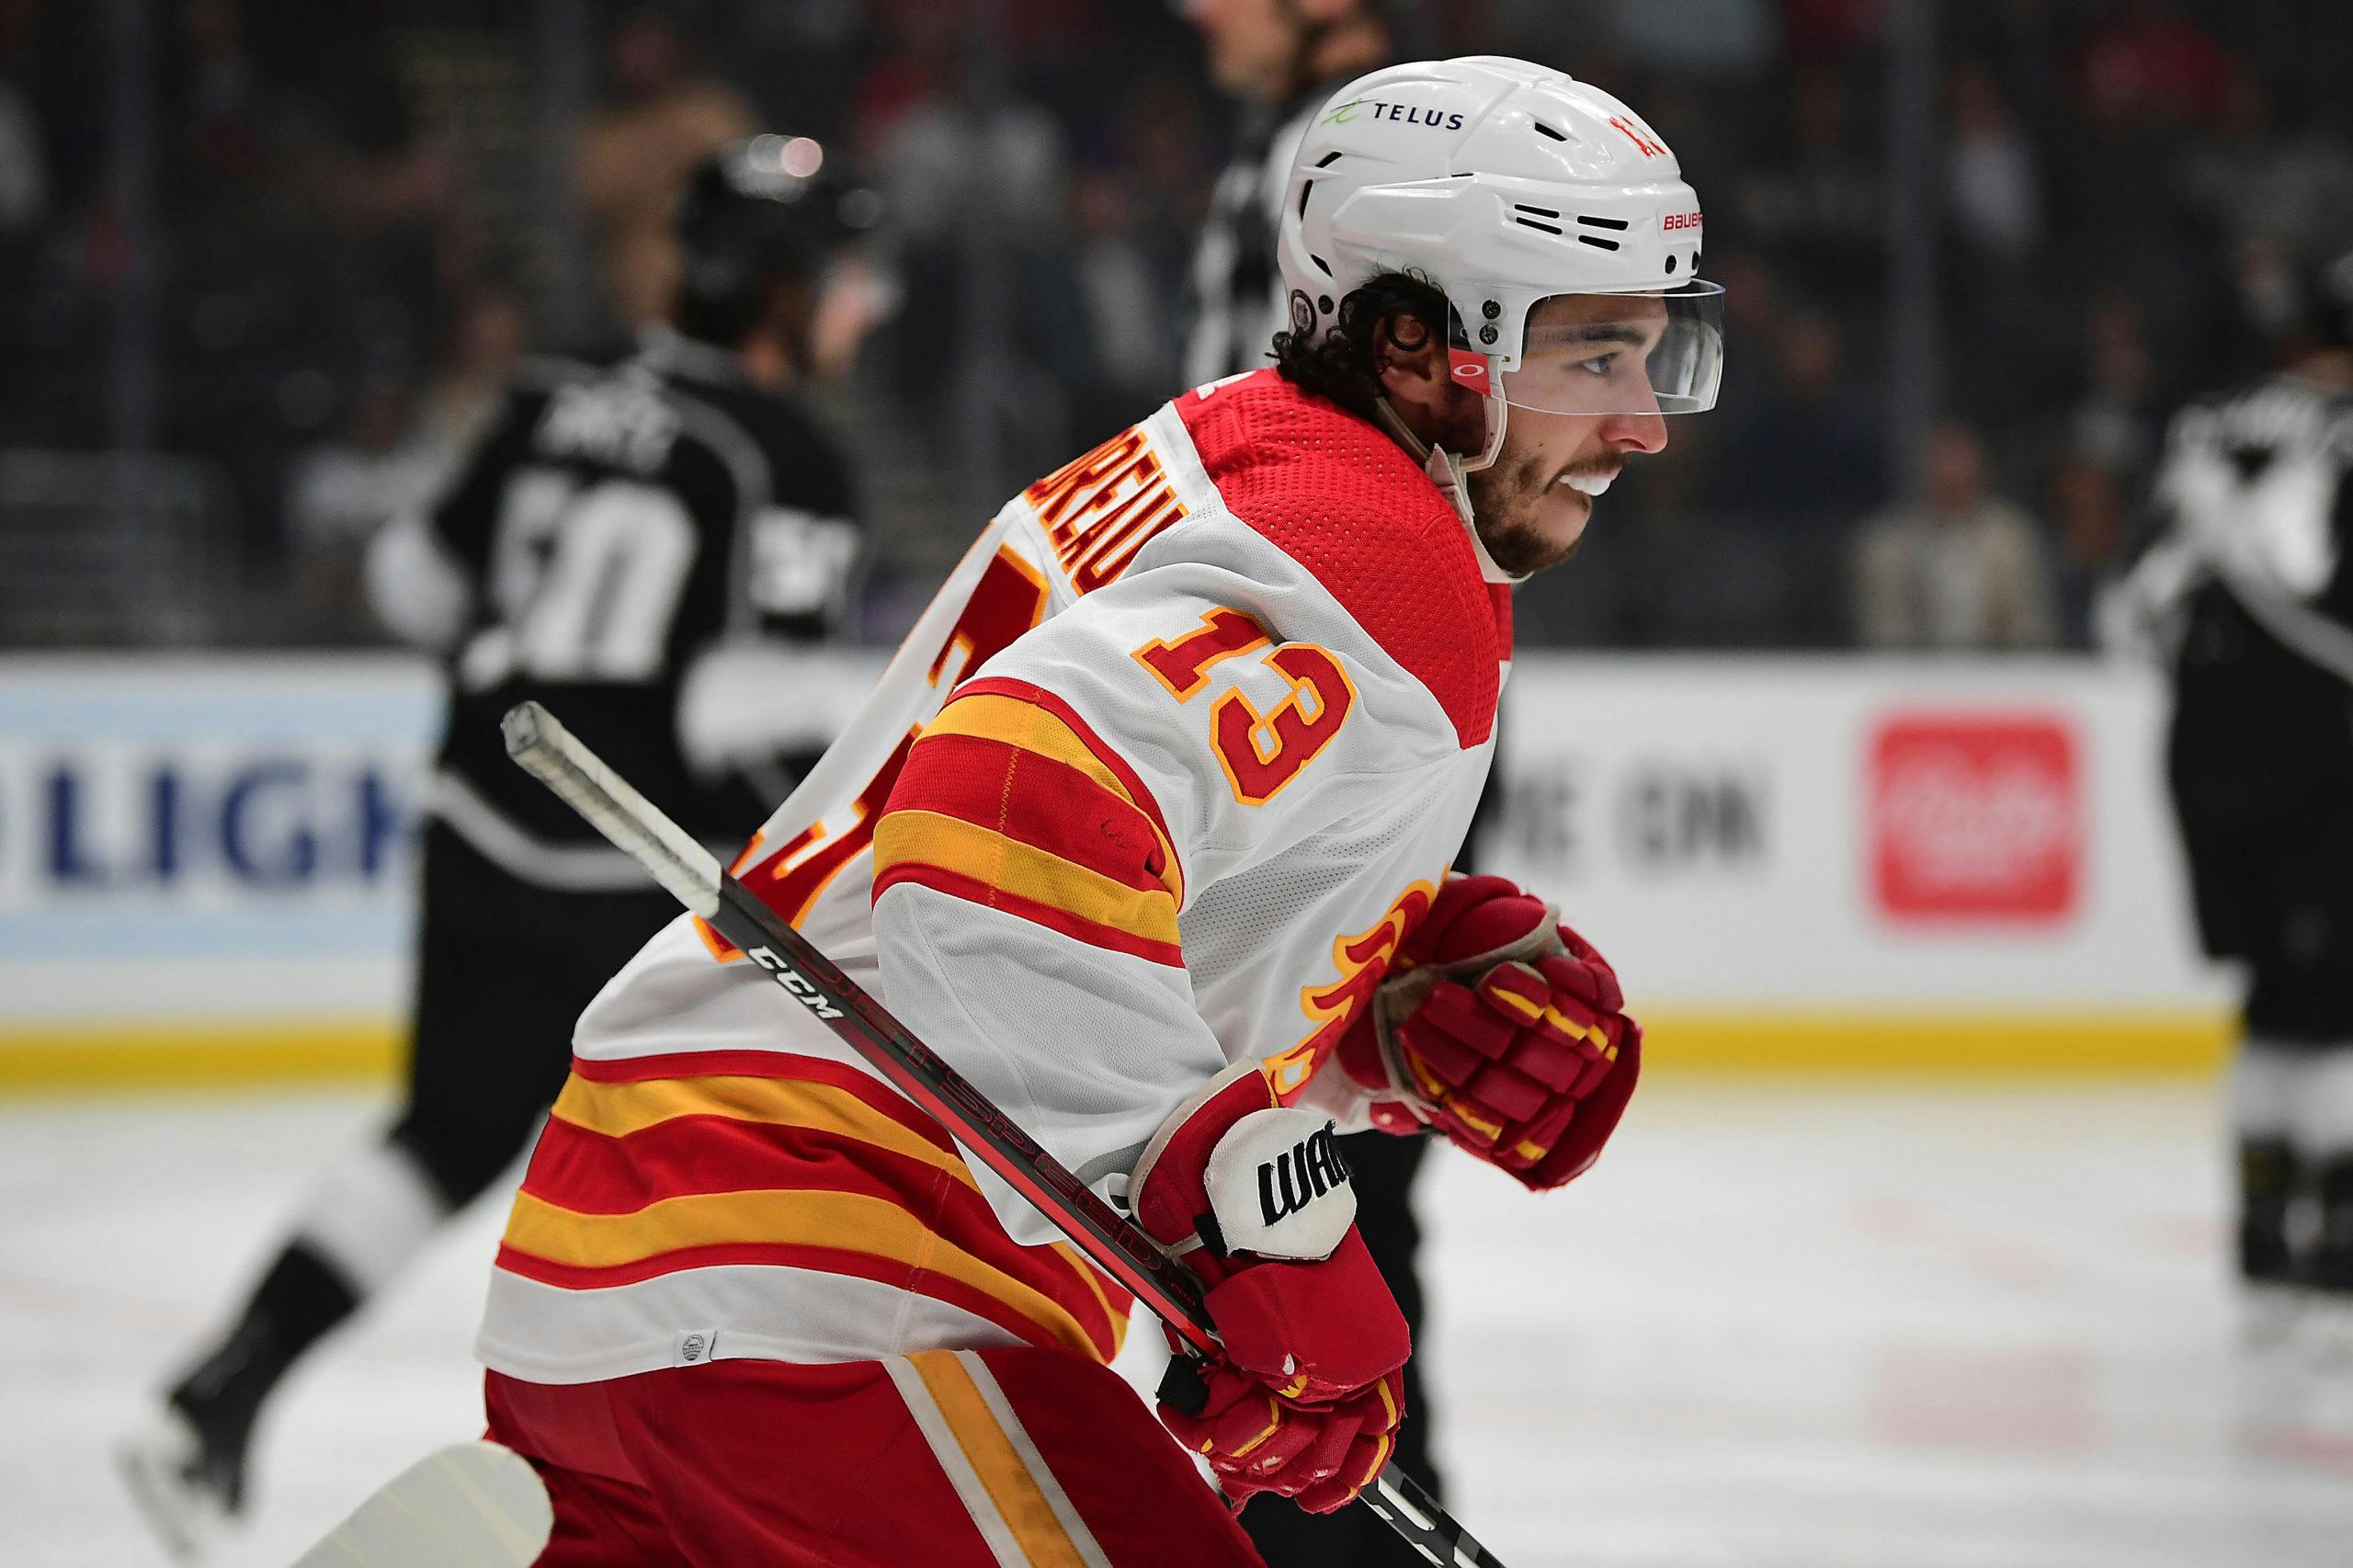 Devil of a deal: Flames lose 4-2 in New Jersey